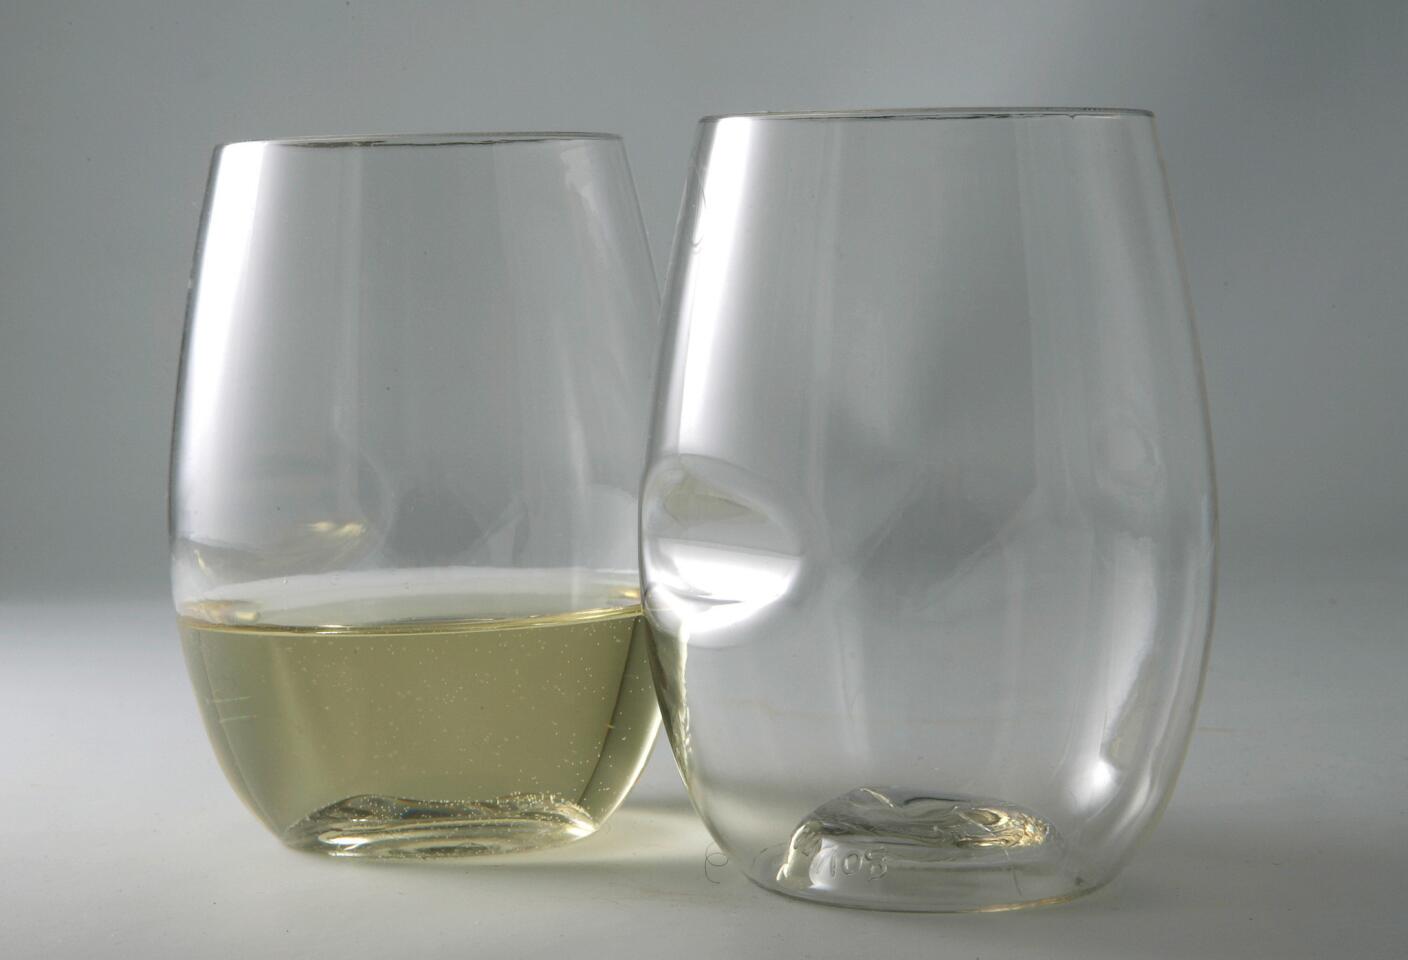 Plastic or acrylic wine glasses. These are inexpensive and can be used again and again rather than thrown away. The best are from the brand Govino, made from BPA-free polymer and available at most wine shops and many retailers. They’re stemless, with a good bowl shape and an an indentation for your thumb.